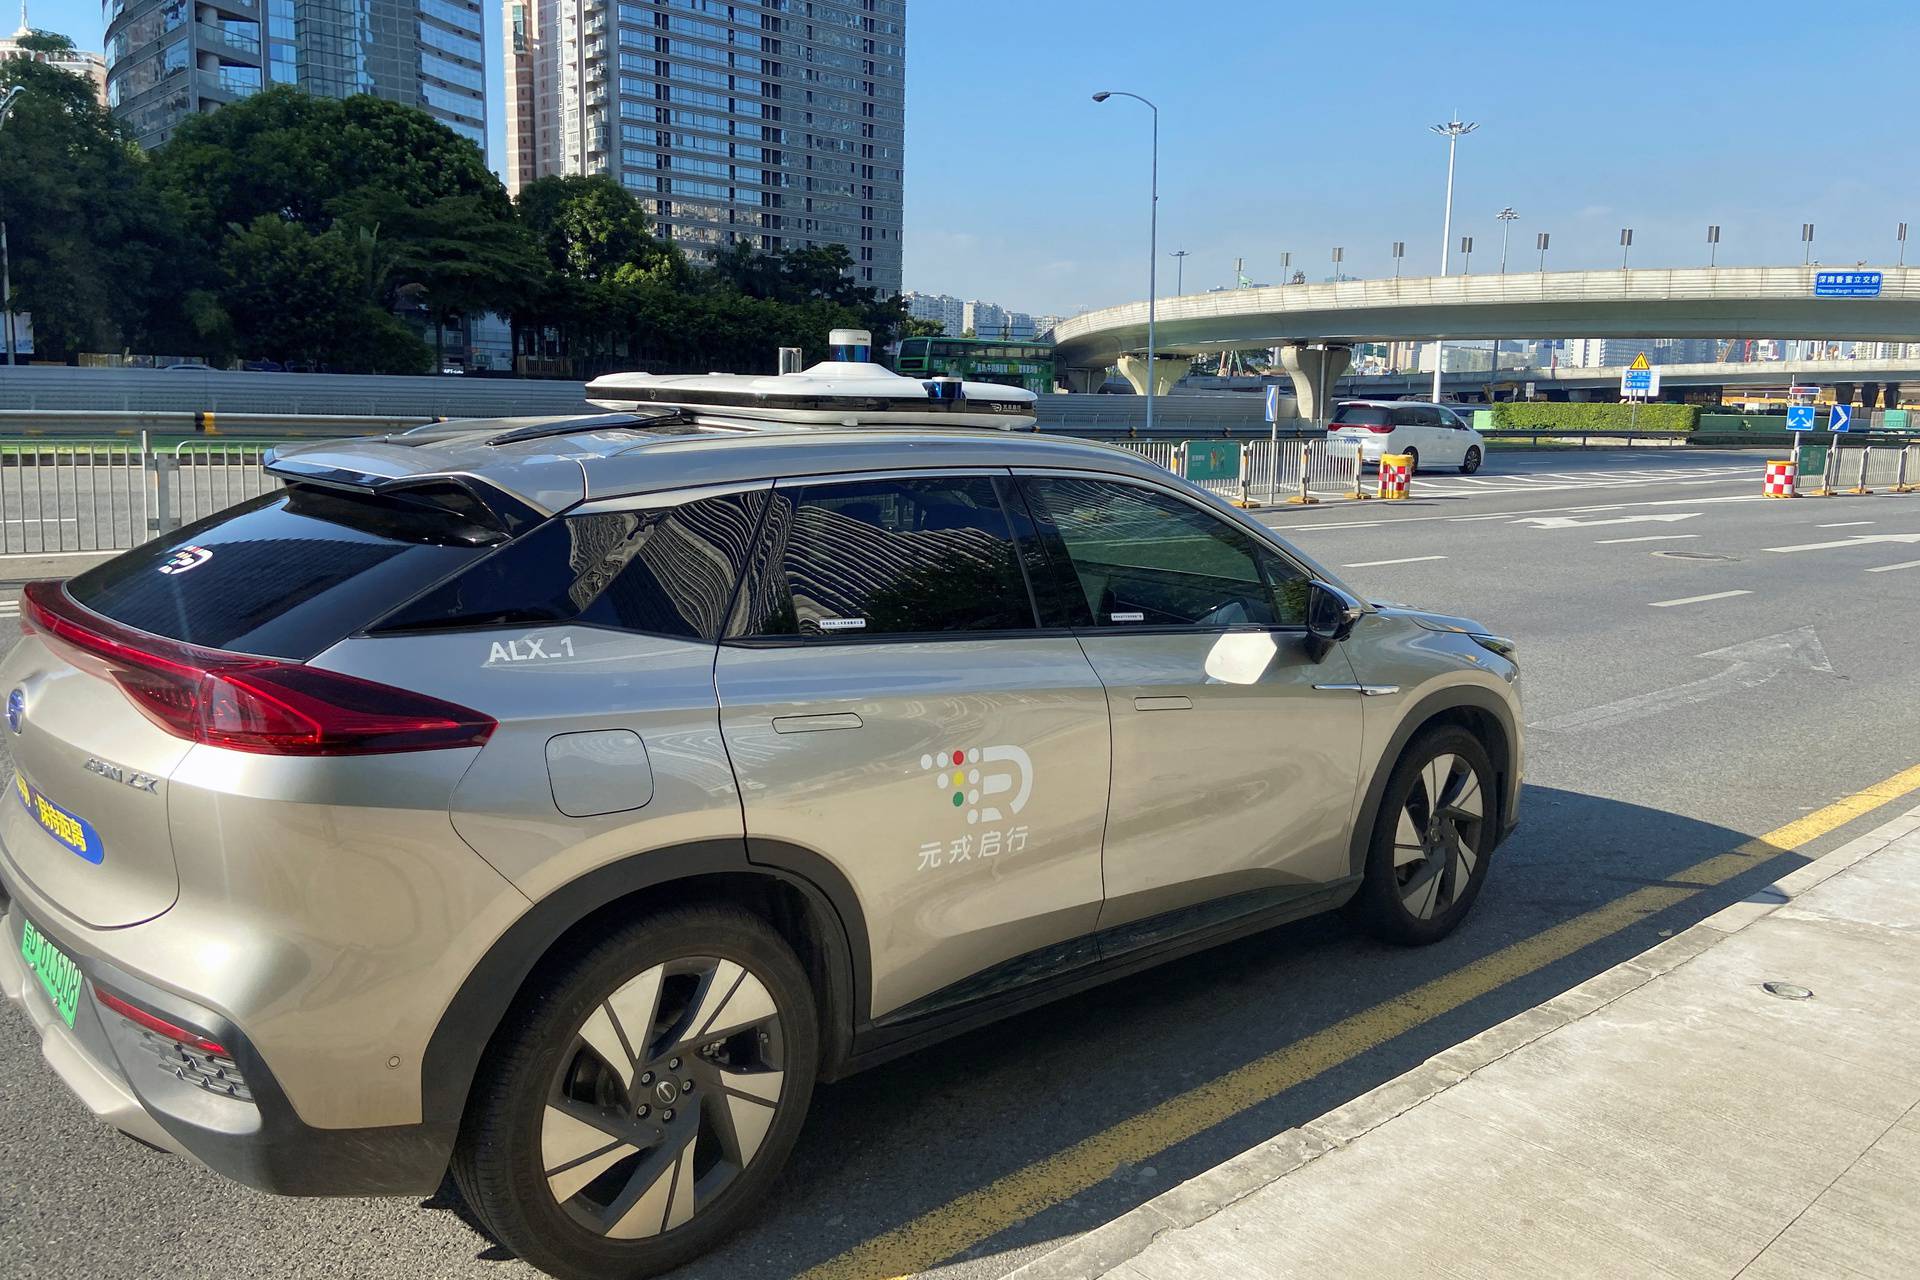 Car with autonomous driving system by Alibaba-backed DeepRoute.ai on a street in Shenzhen